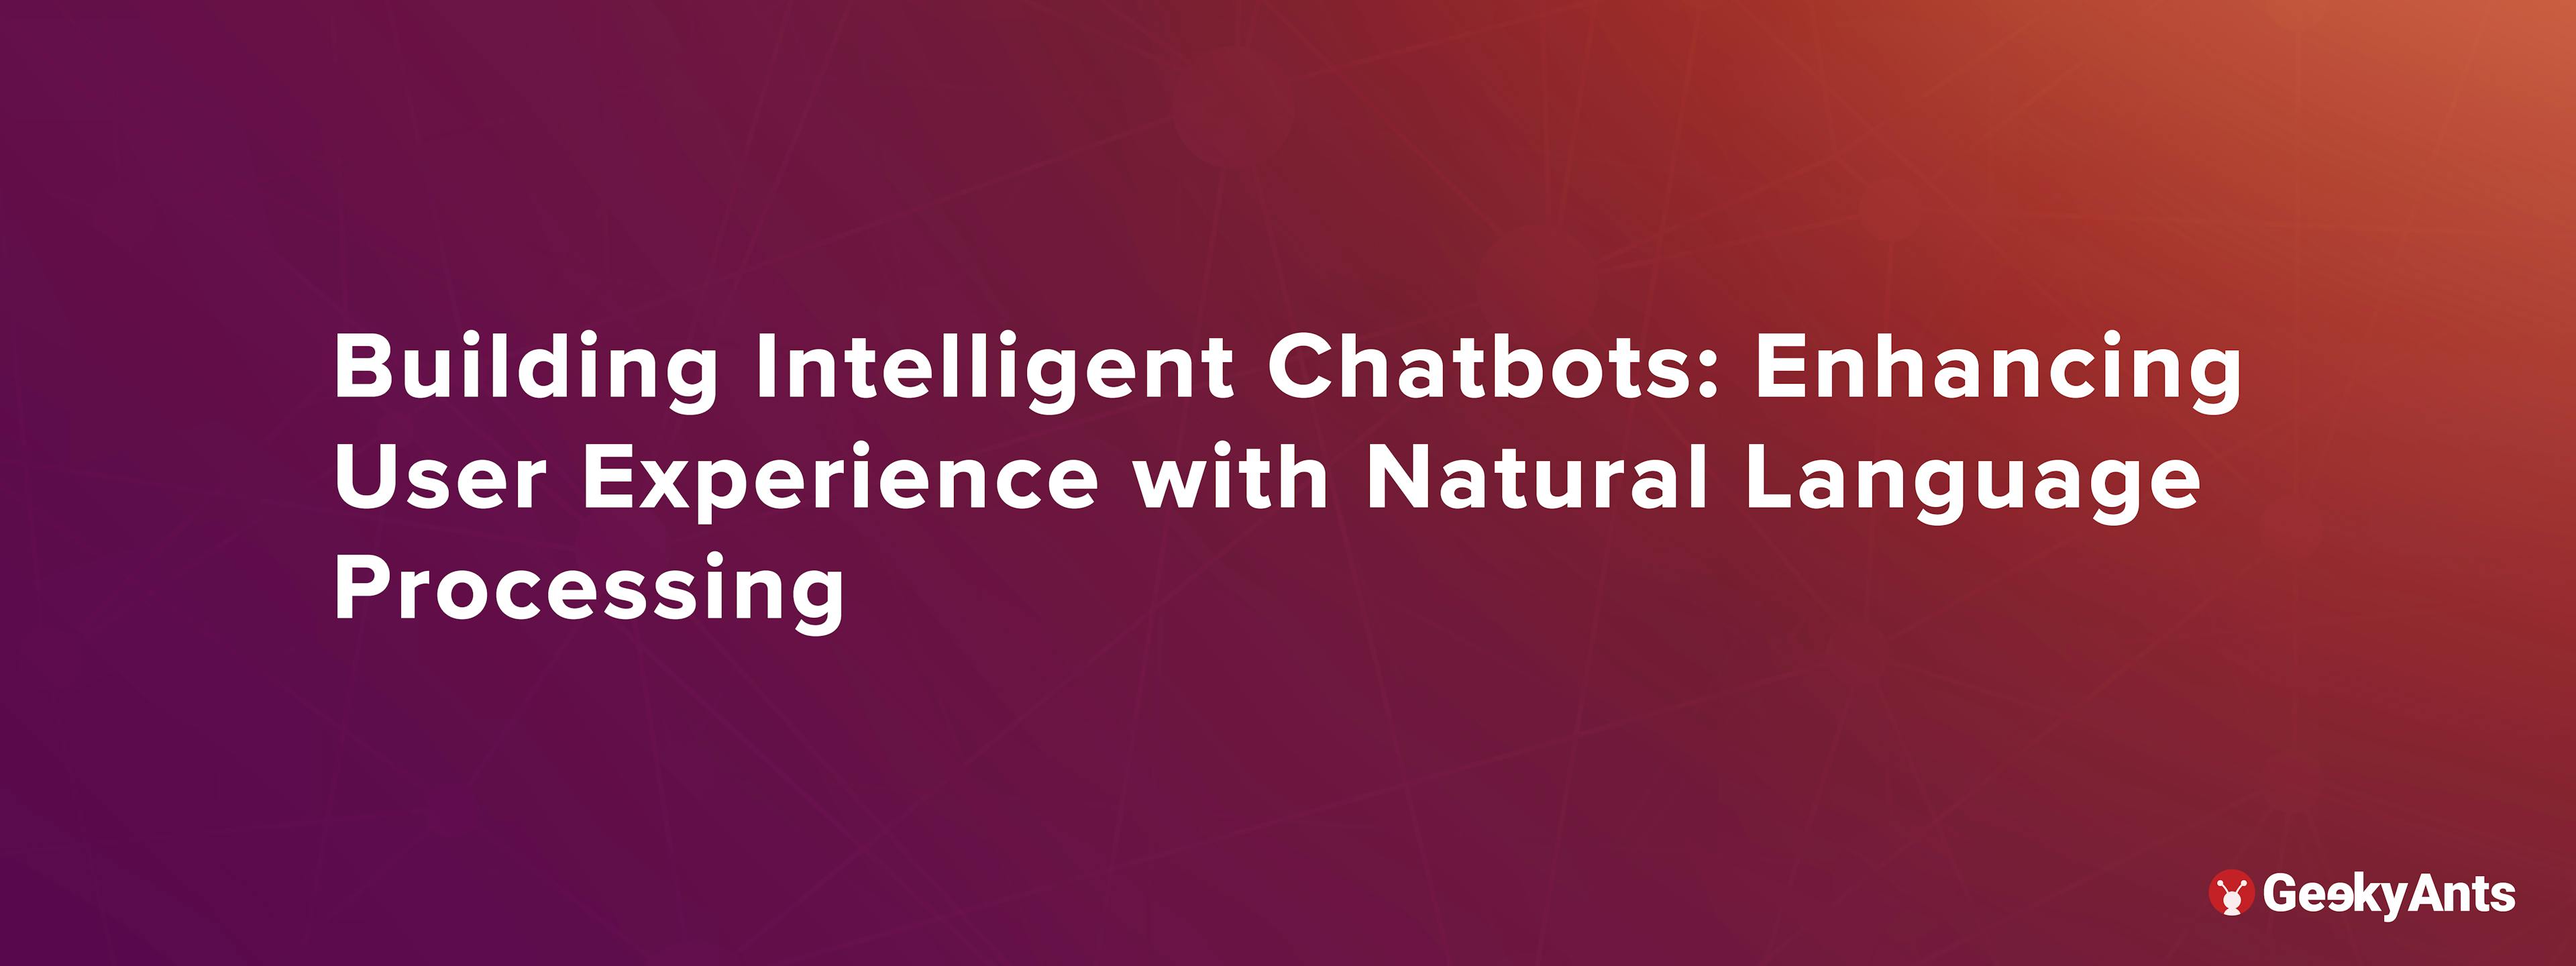 Building Intelligent Chatbots: Enhancing User Experience with Natural Language Processing